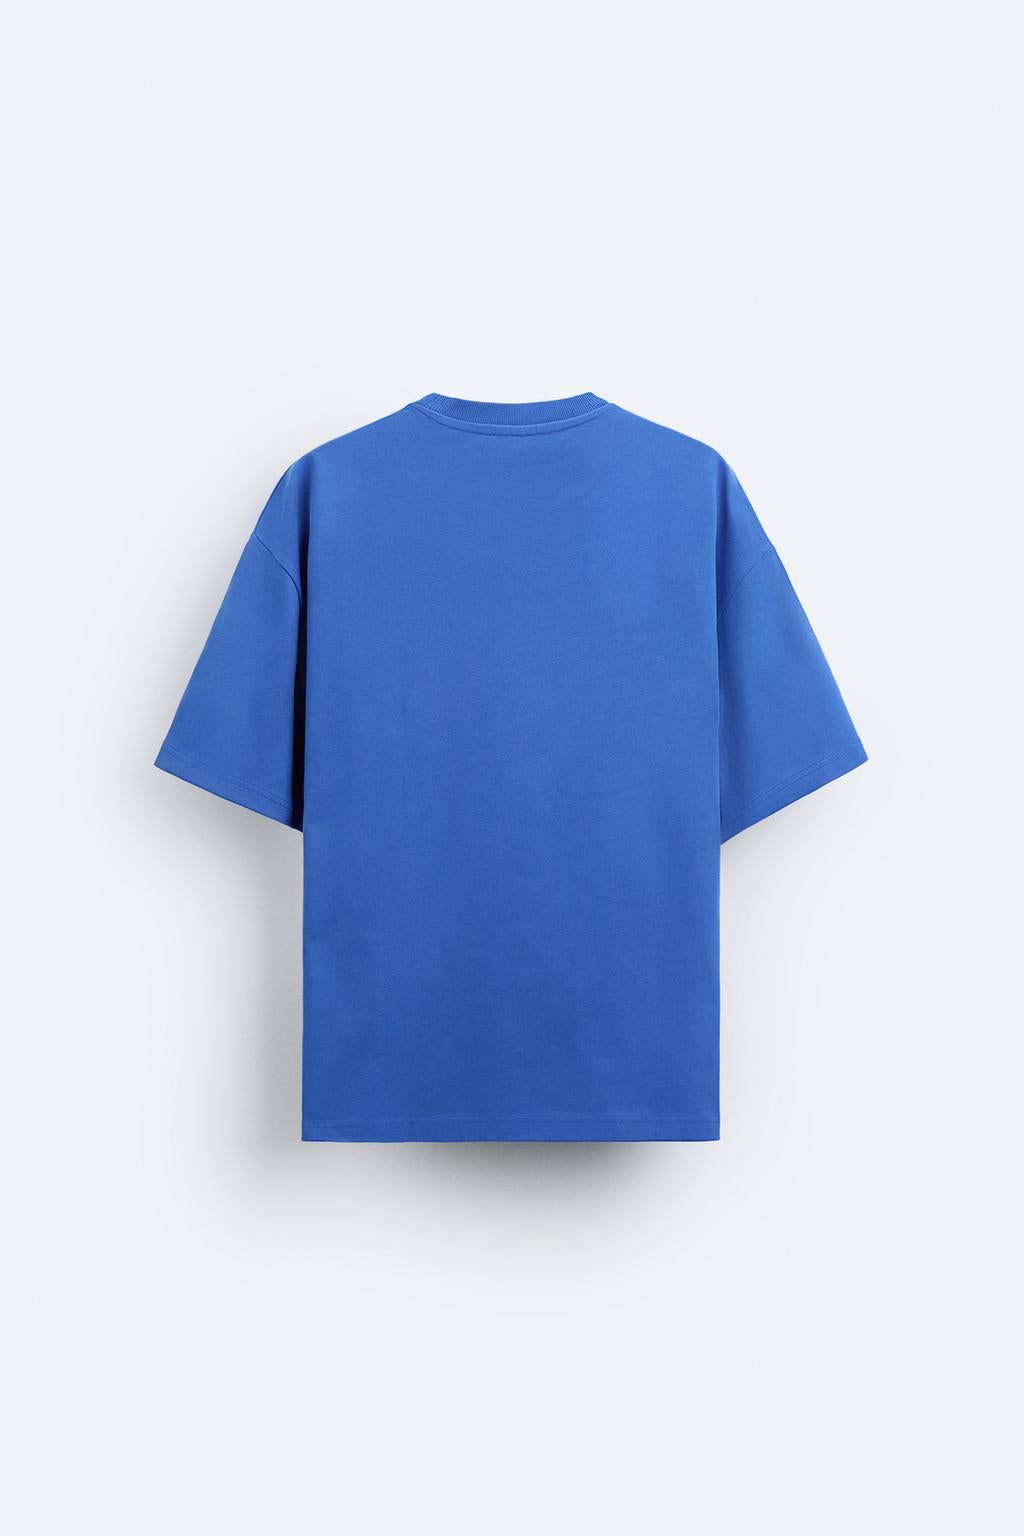 ZARA T-SHIRT WITH PRINTED PATCH